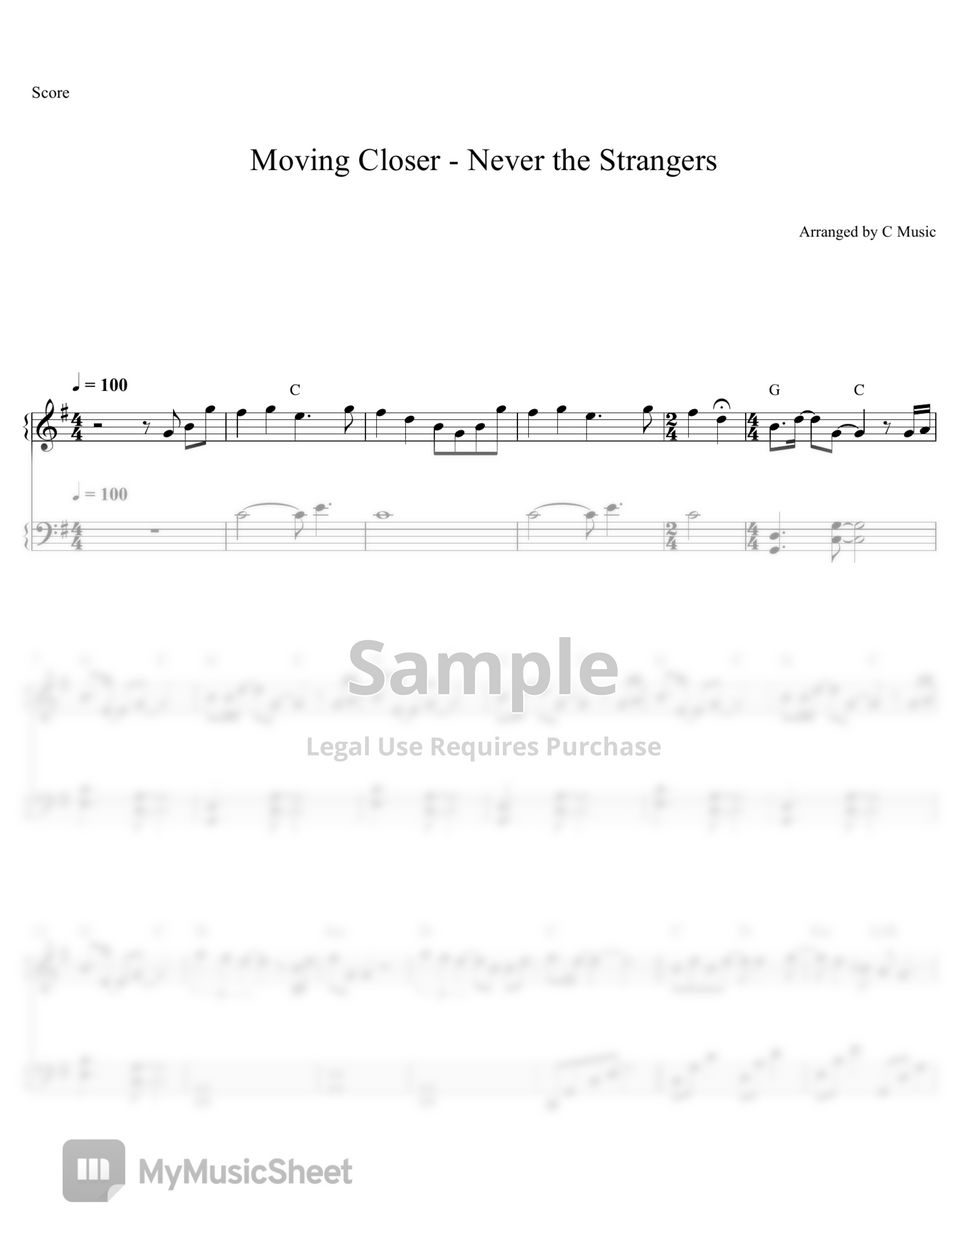 Never the Strangers - Moving Closer by C Music